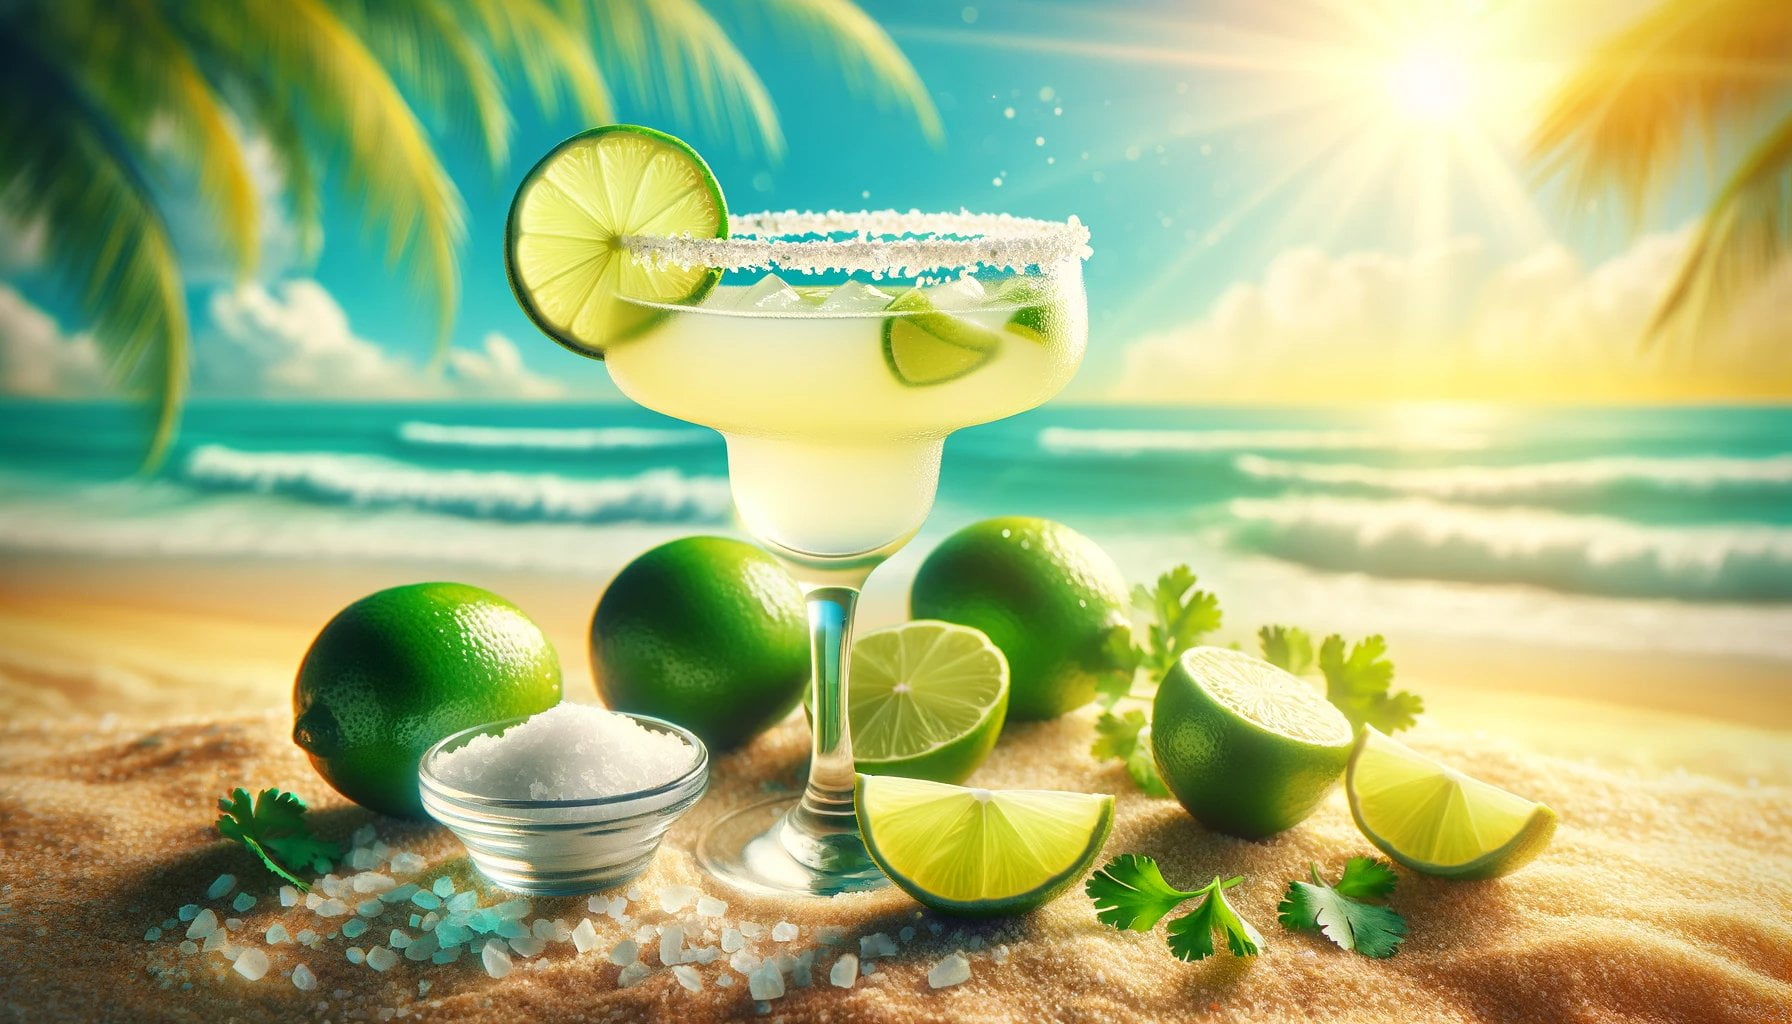 cutwater lime margarita nutrition facts 1